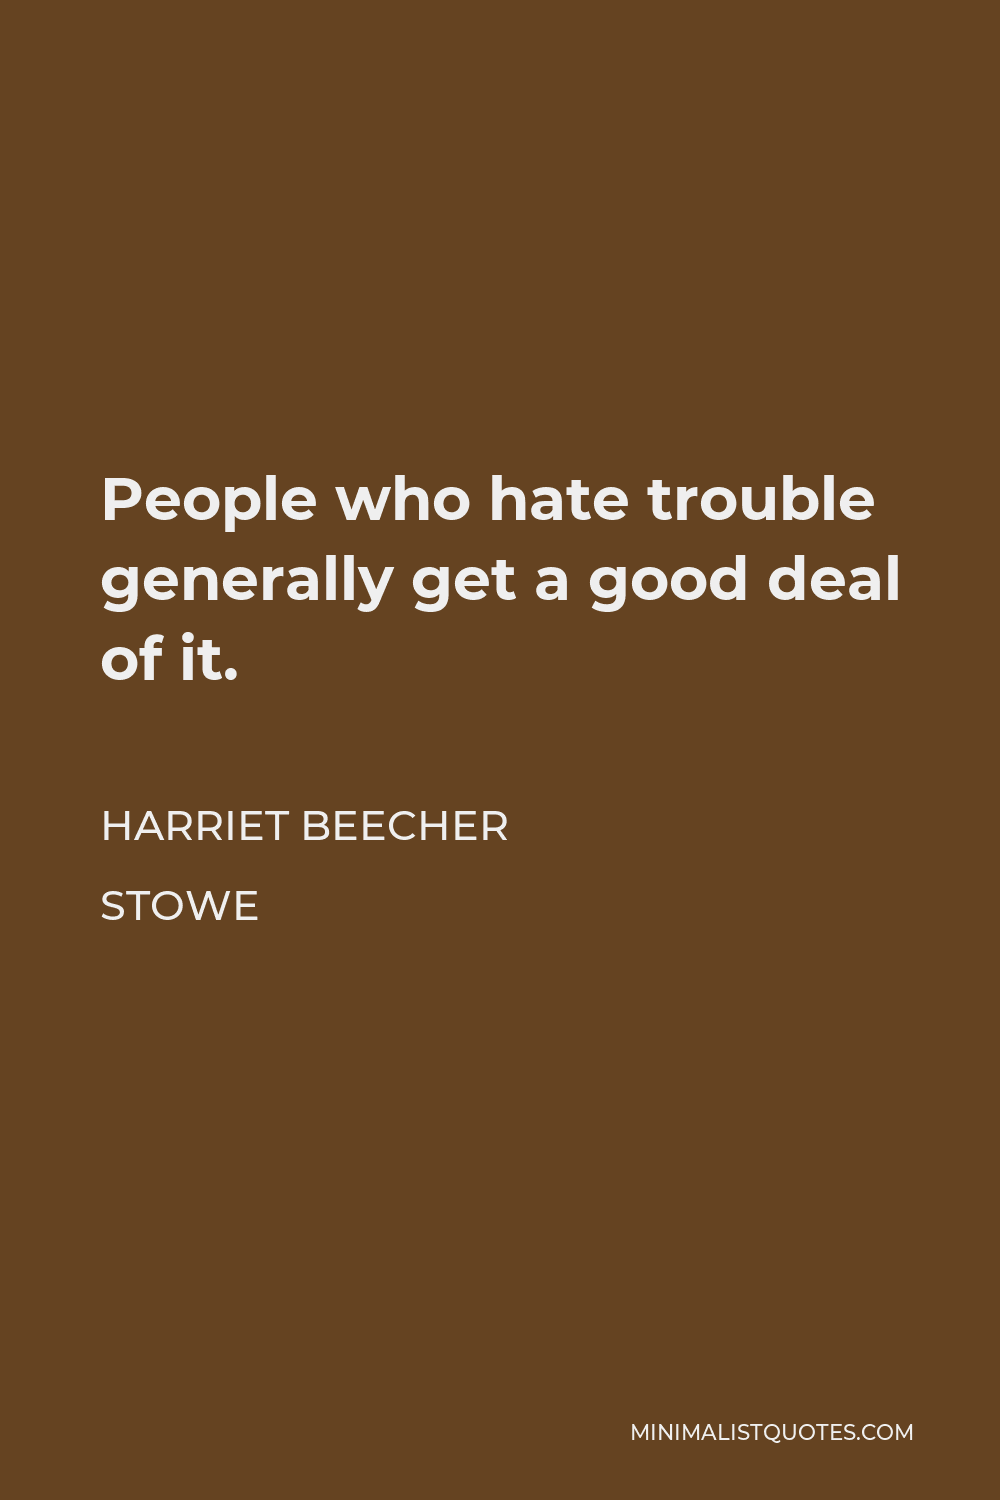 Harriet Beecher Stowe Quote - People who hate trouble generally get a good deal of it.